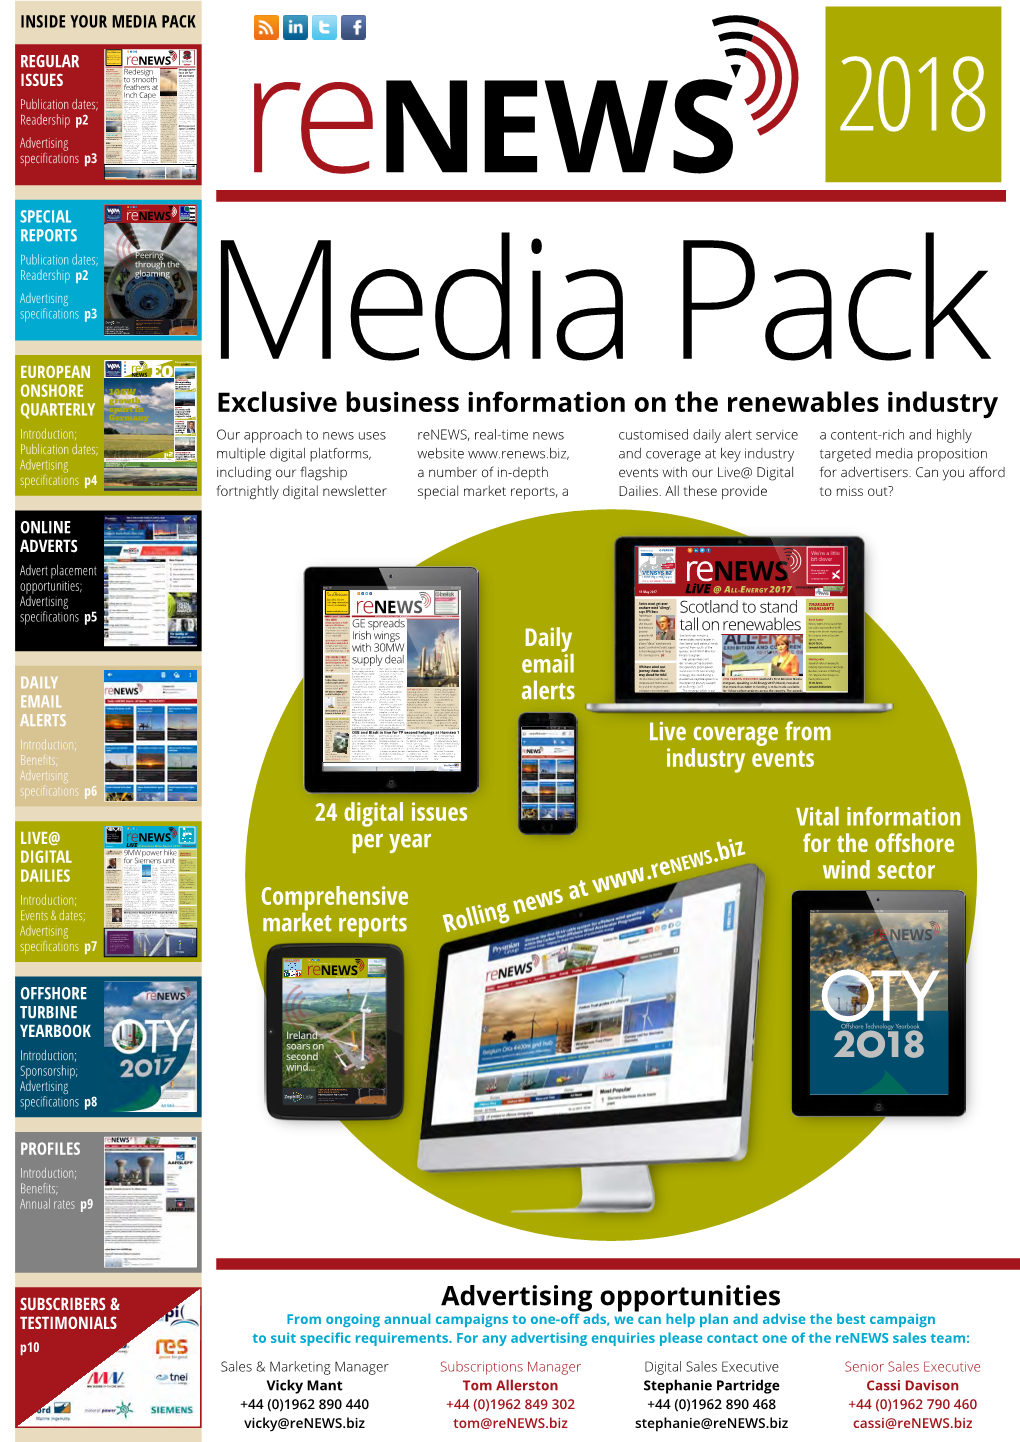 Exclusive Business Information on the Renewables Industry Advertising